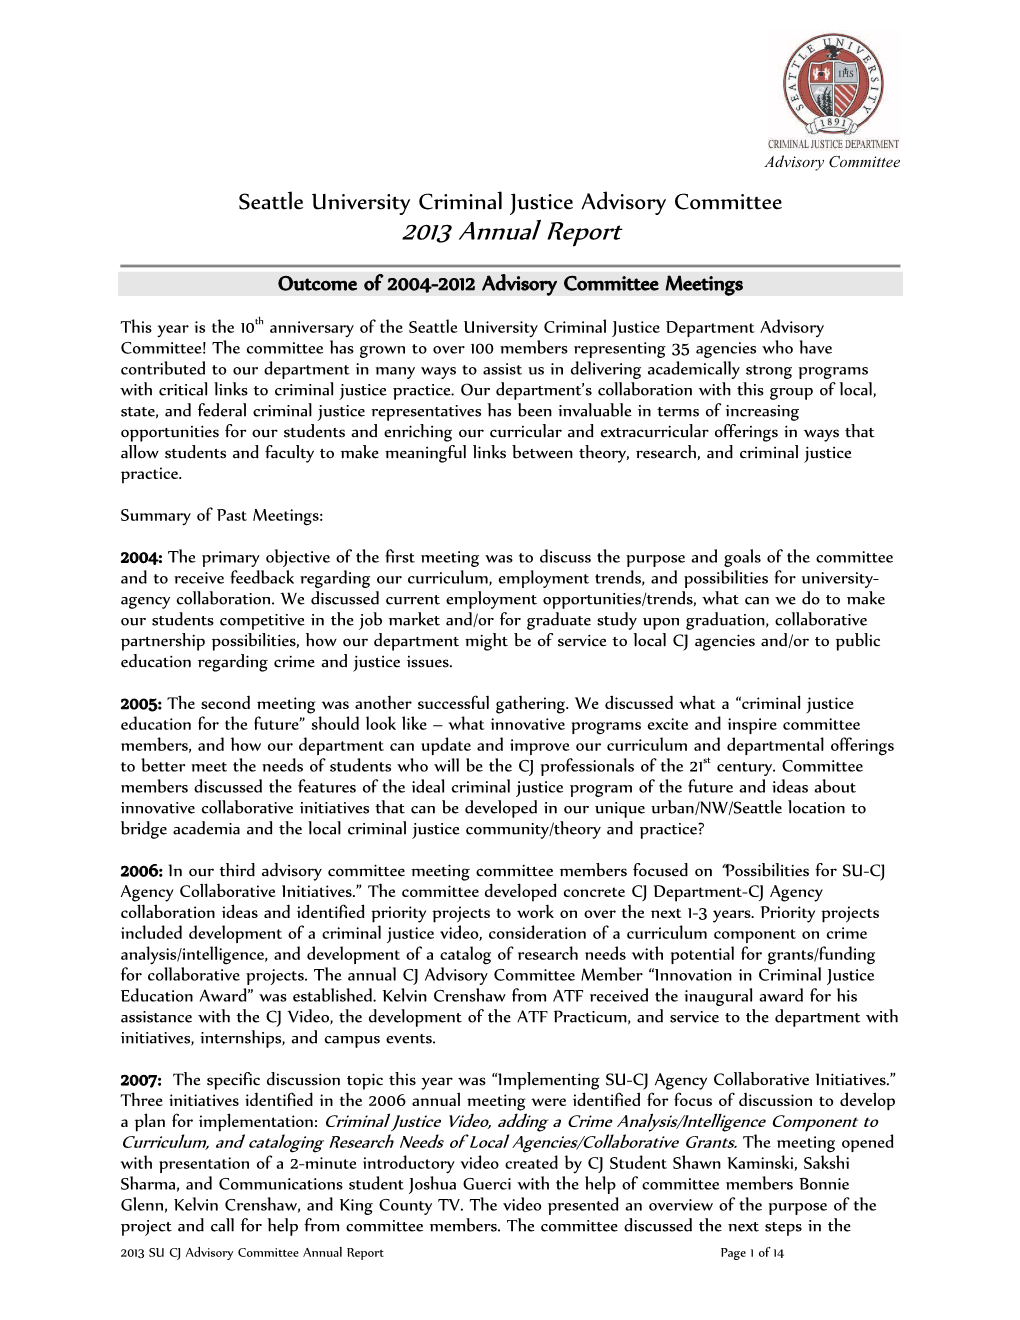 Seattle University Criminal Justice Advisory Committee 2013 Annual Report